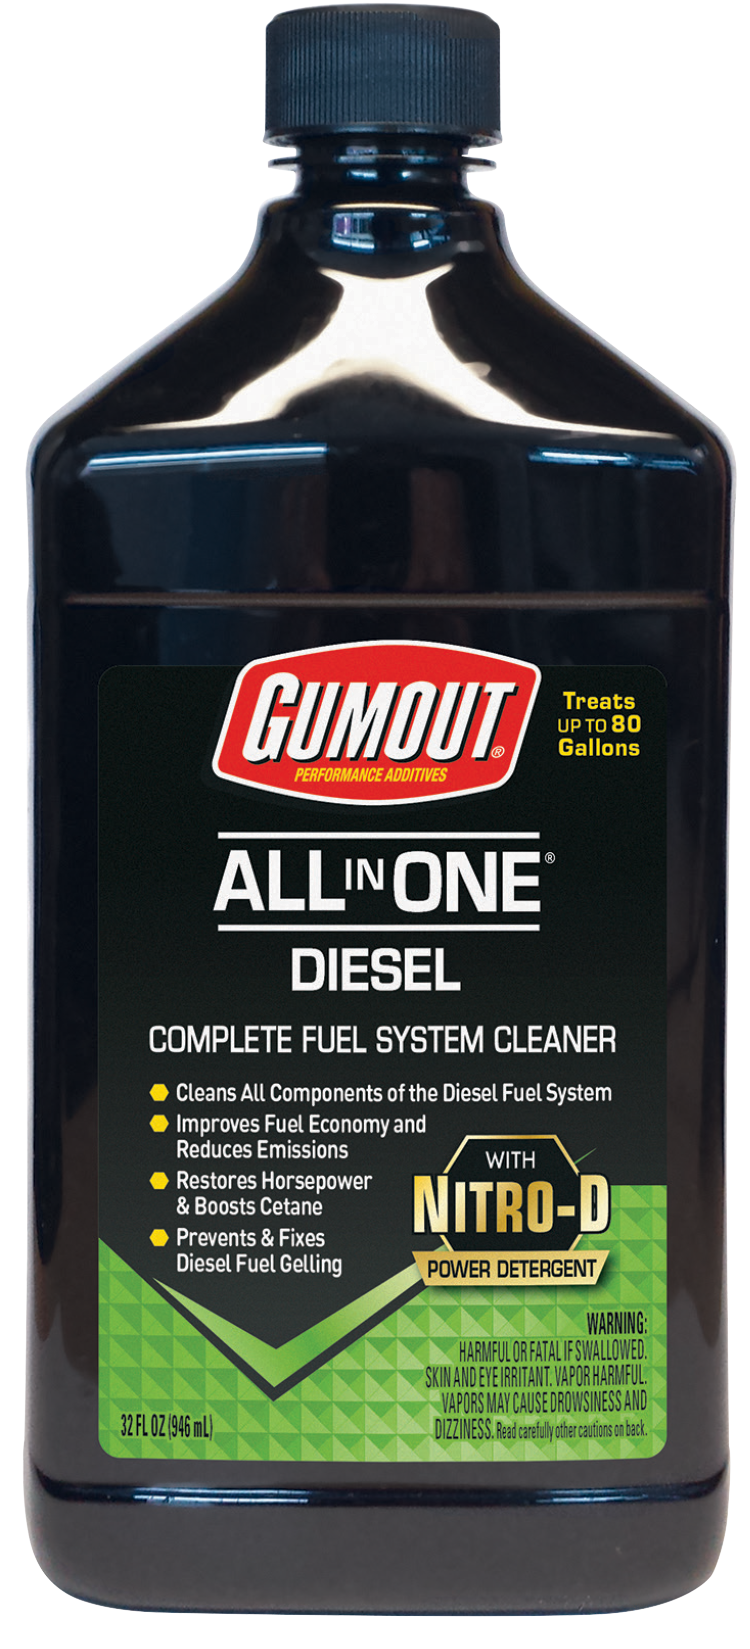 Gumout All-In-One Diesel Complete Fuel System Cleane